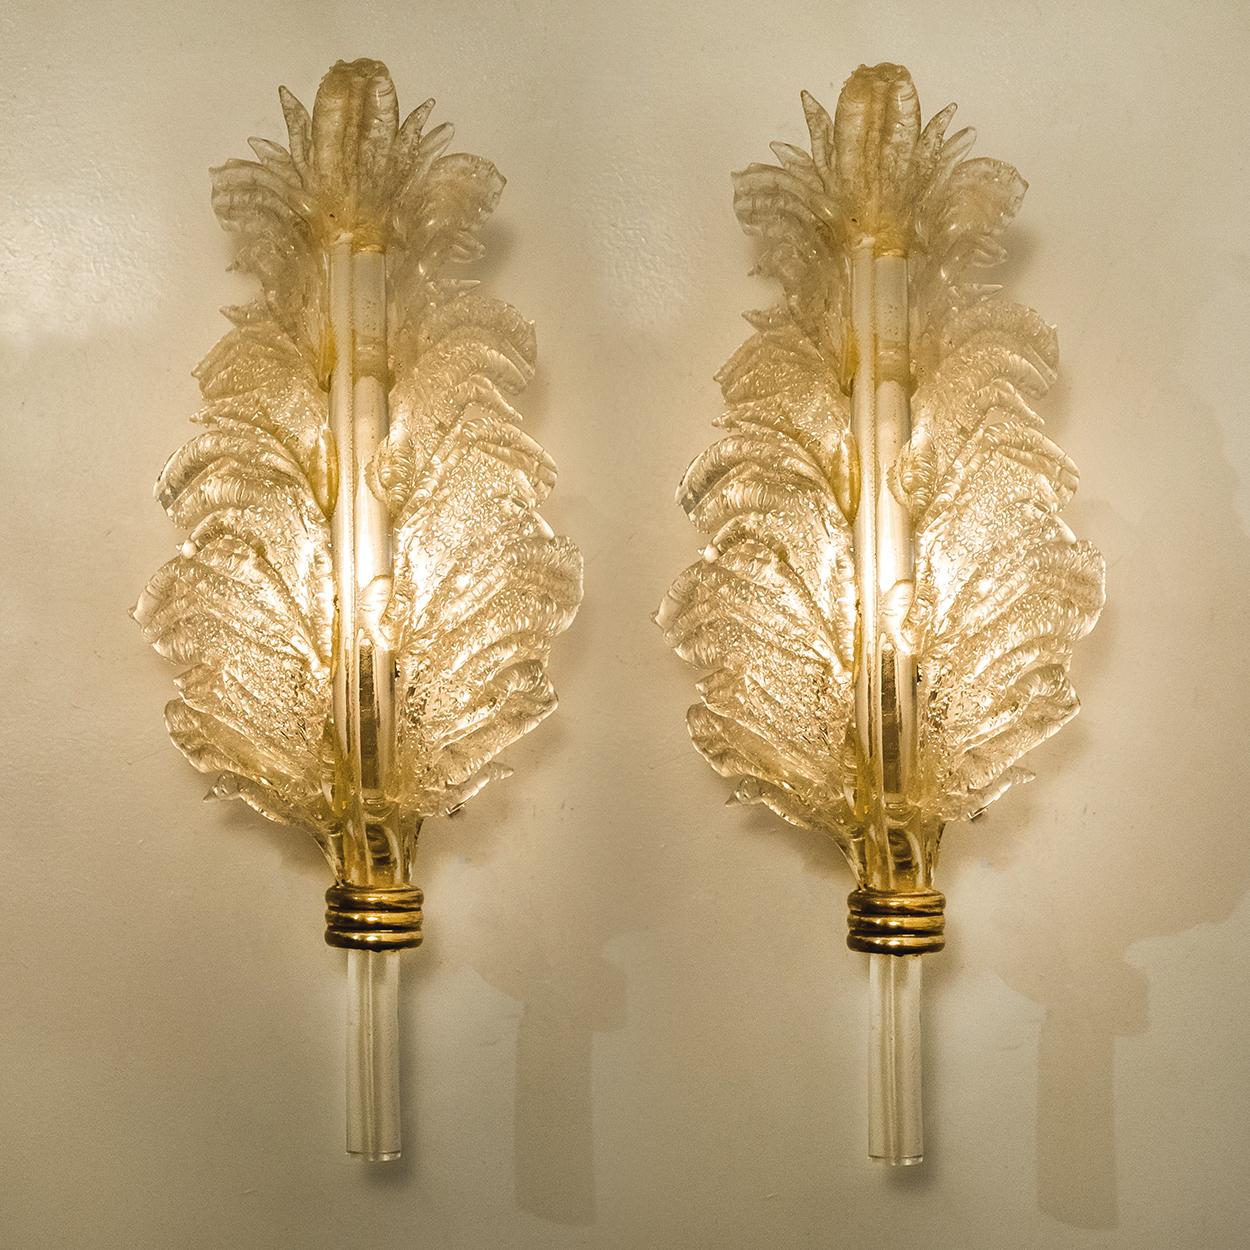 20th Century Pair of Large Wall Sconces Barovier & Toso Gold Glass, Murano, Italy